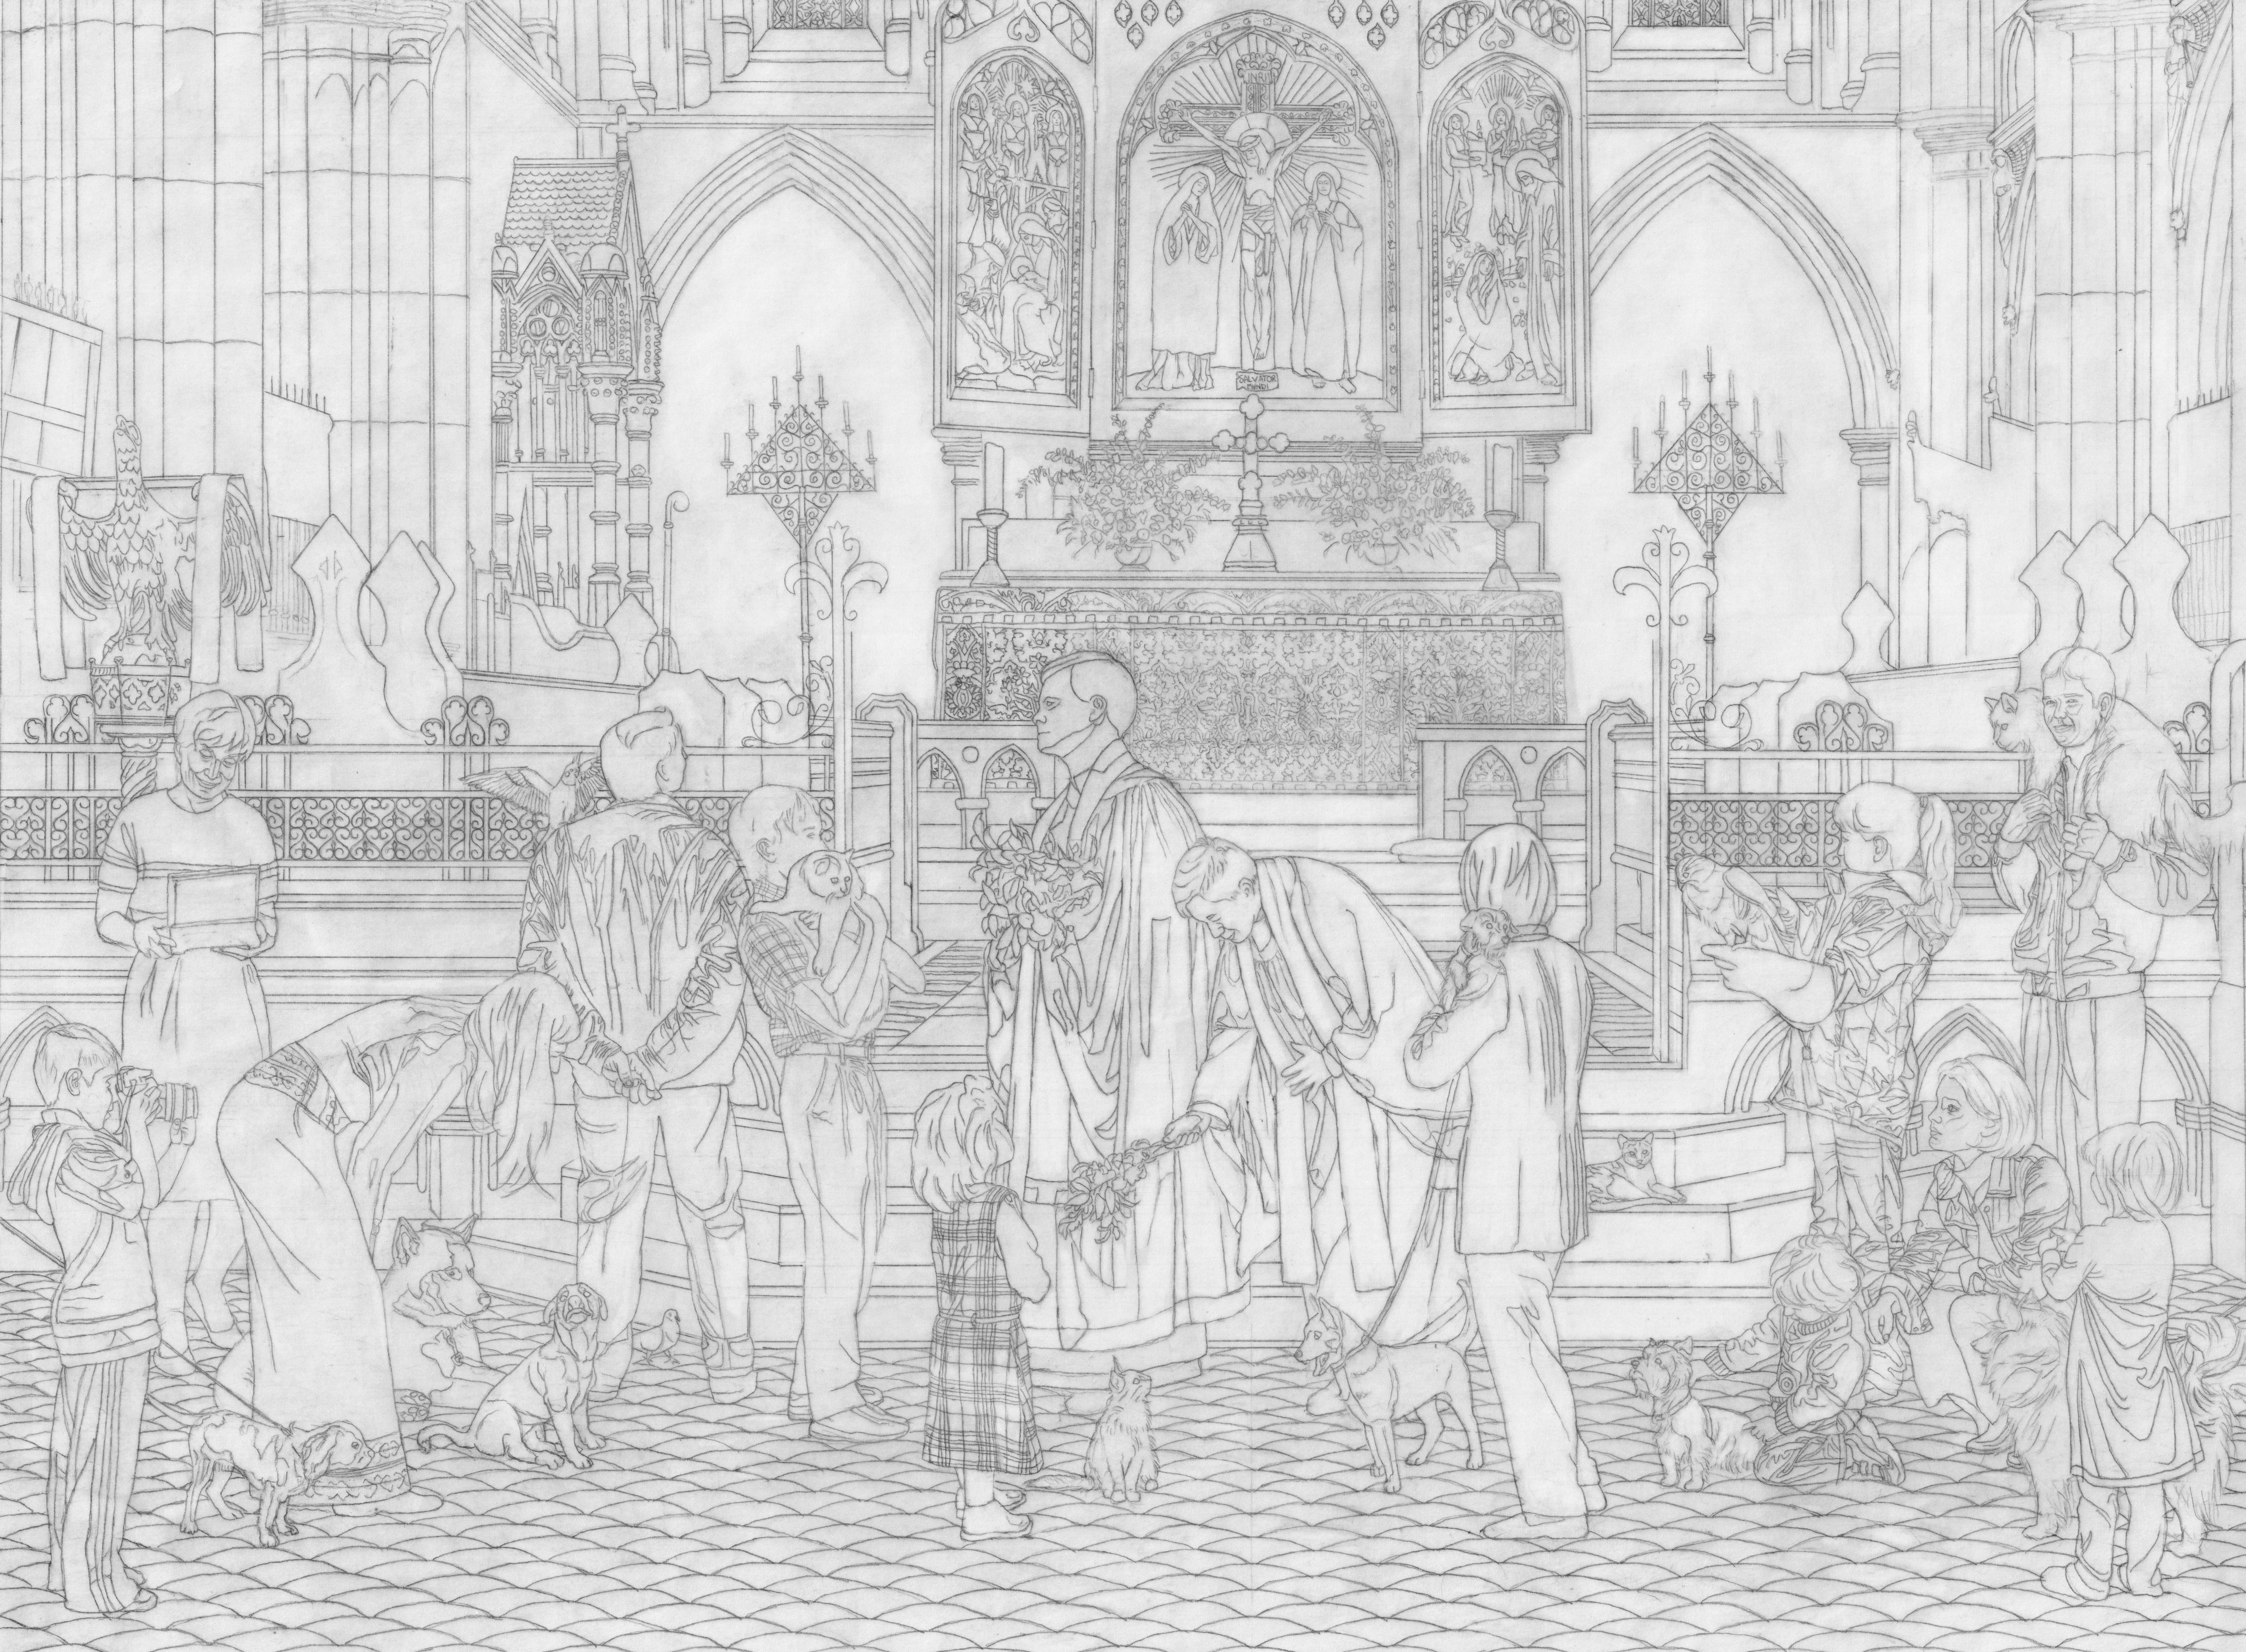 Final line drawing for The Blessing of the Animals on vellum paper    
©2010  Ann James Massey, Archival Framed $7,500.00 